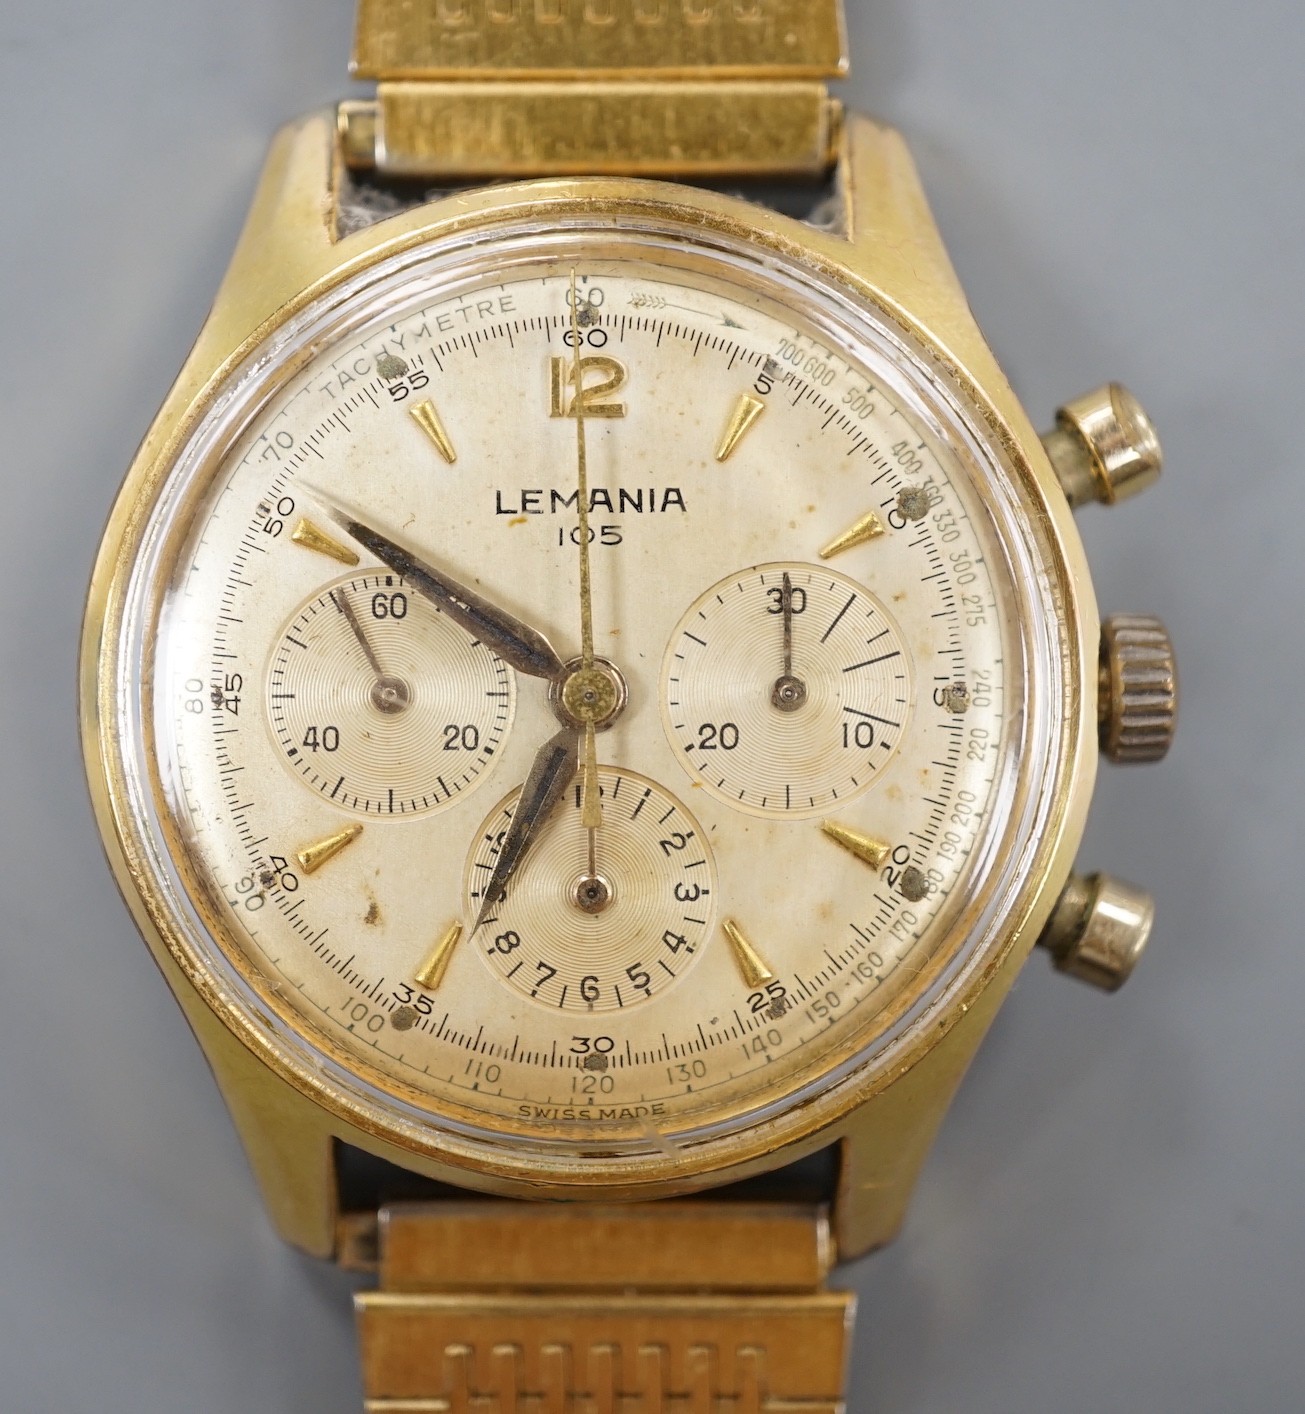 A gentleman's mid 20th century Lemania 105 steel and gold plated chronograph wrist watch, on associated steel and gold plated bracelet.